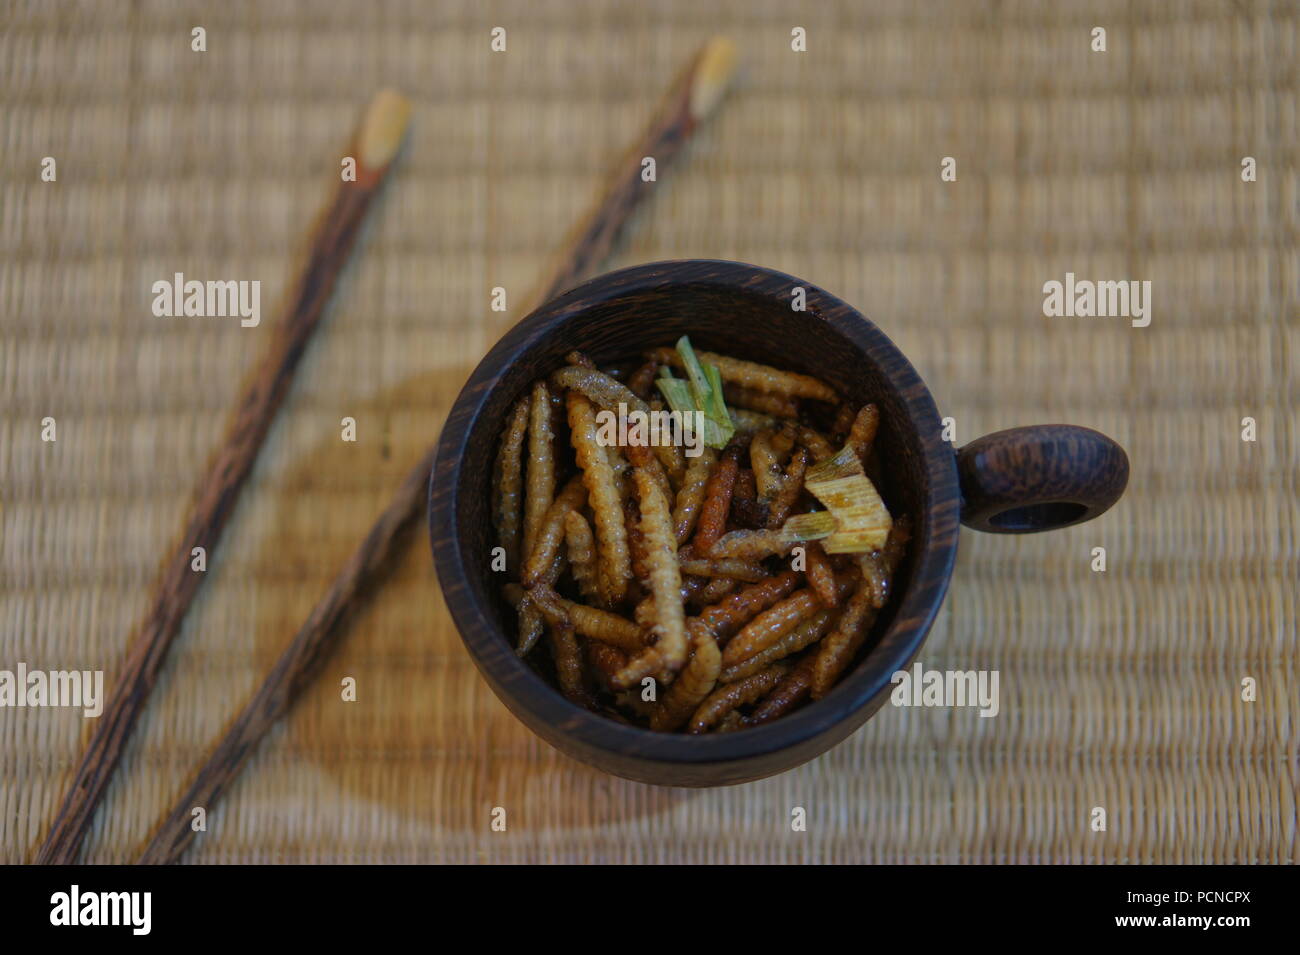 Edible Insects Bamboo Caterpillars in cup on a bamboo place mat Stock Photo